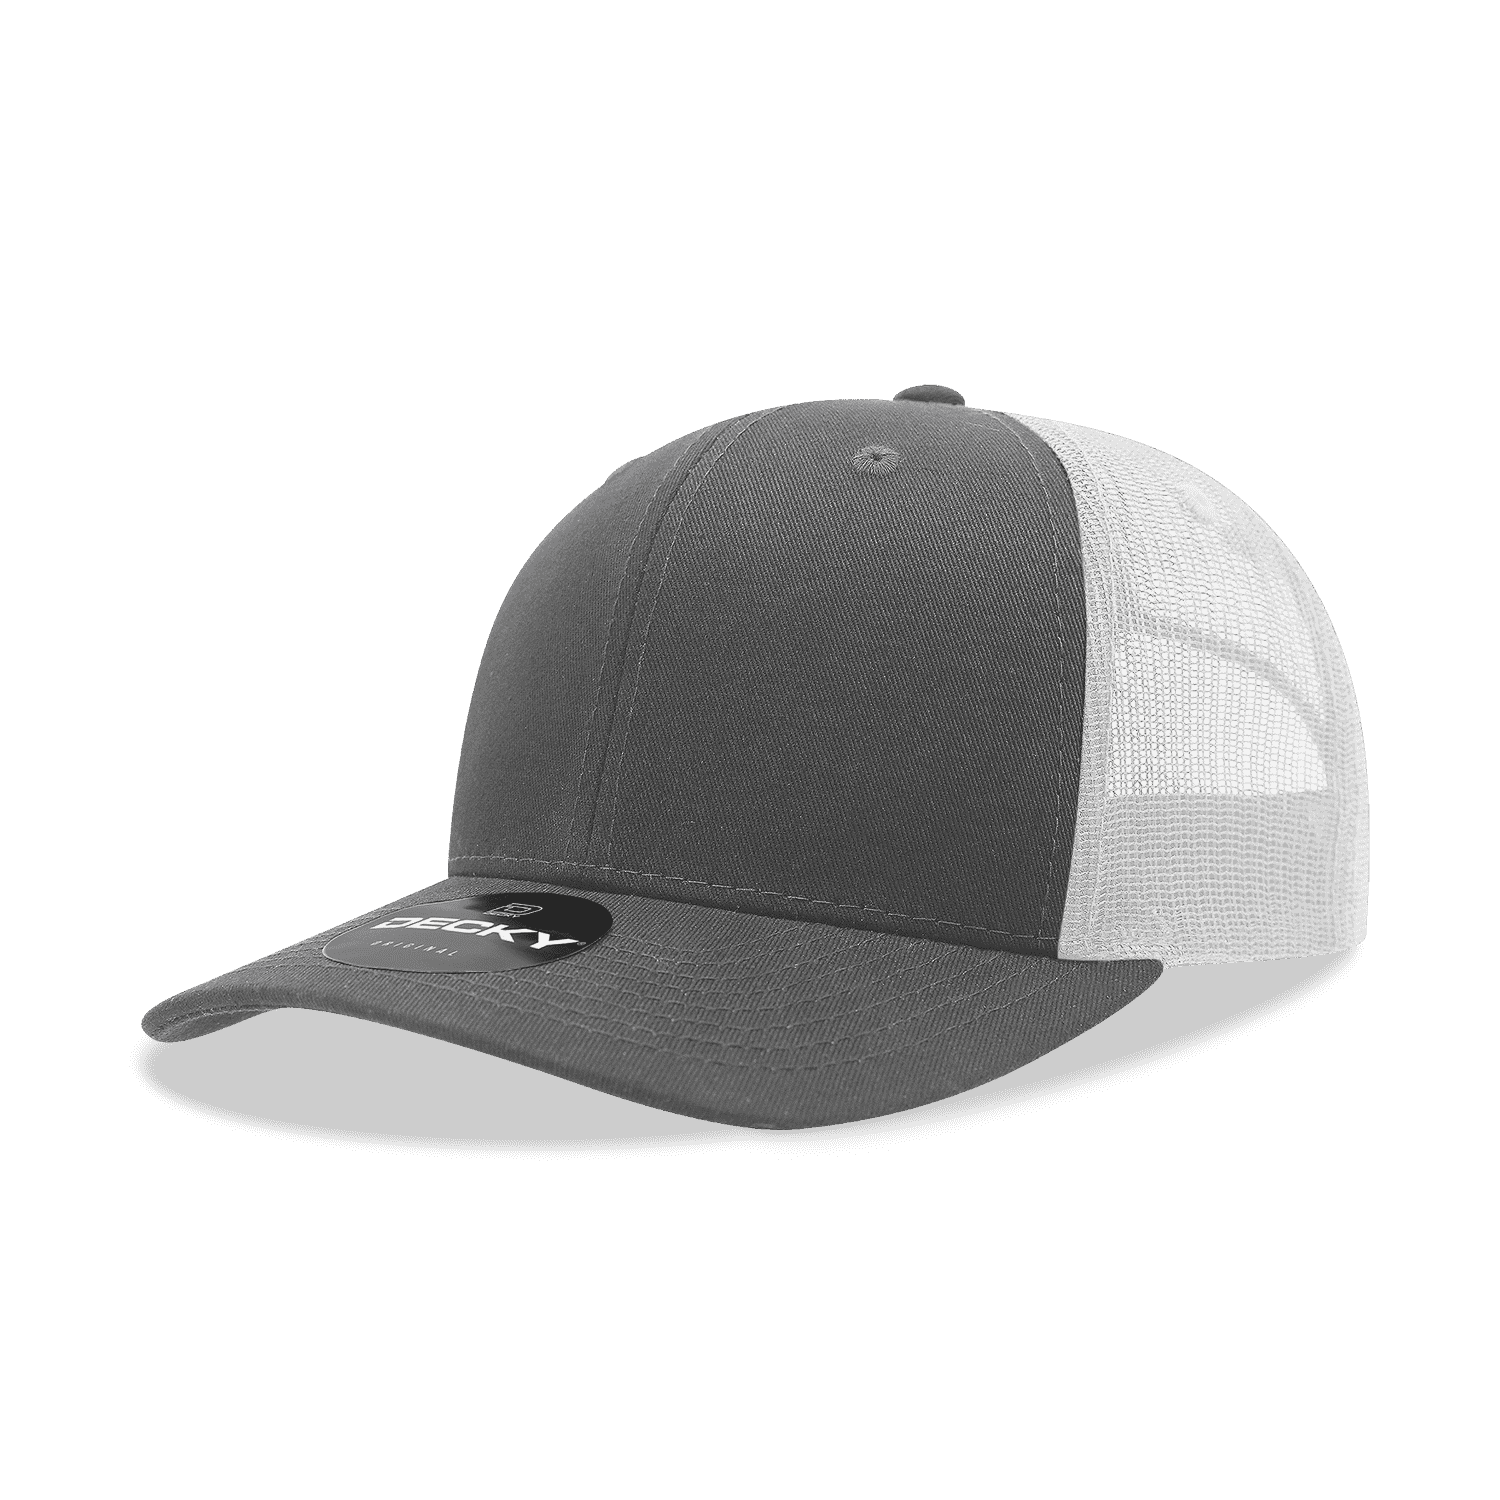 Decky 6021 Mid Profile 6 Panel Poly Cotton Trucker Cap - Charcoal  White